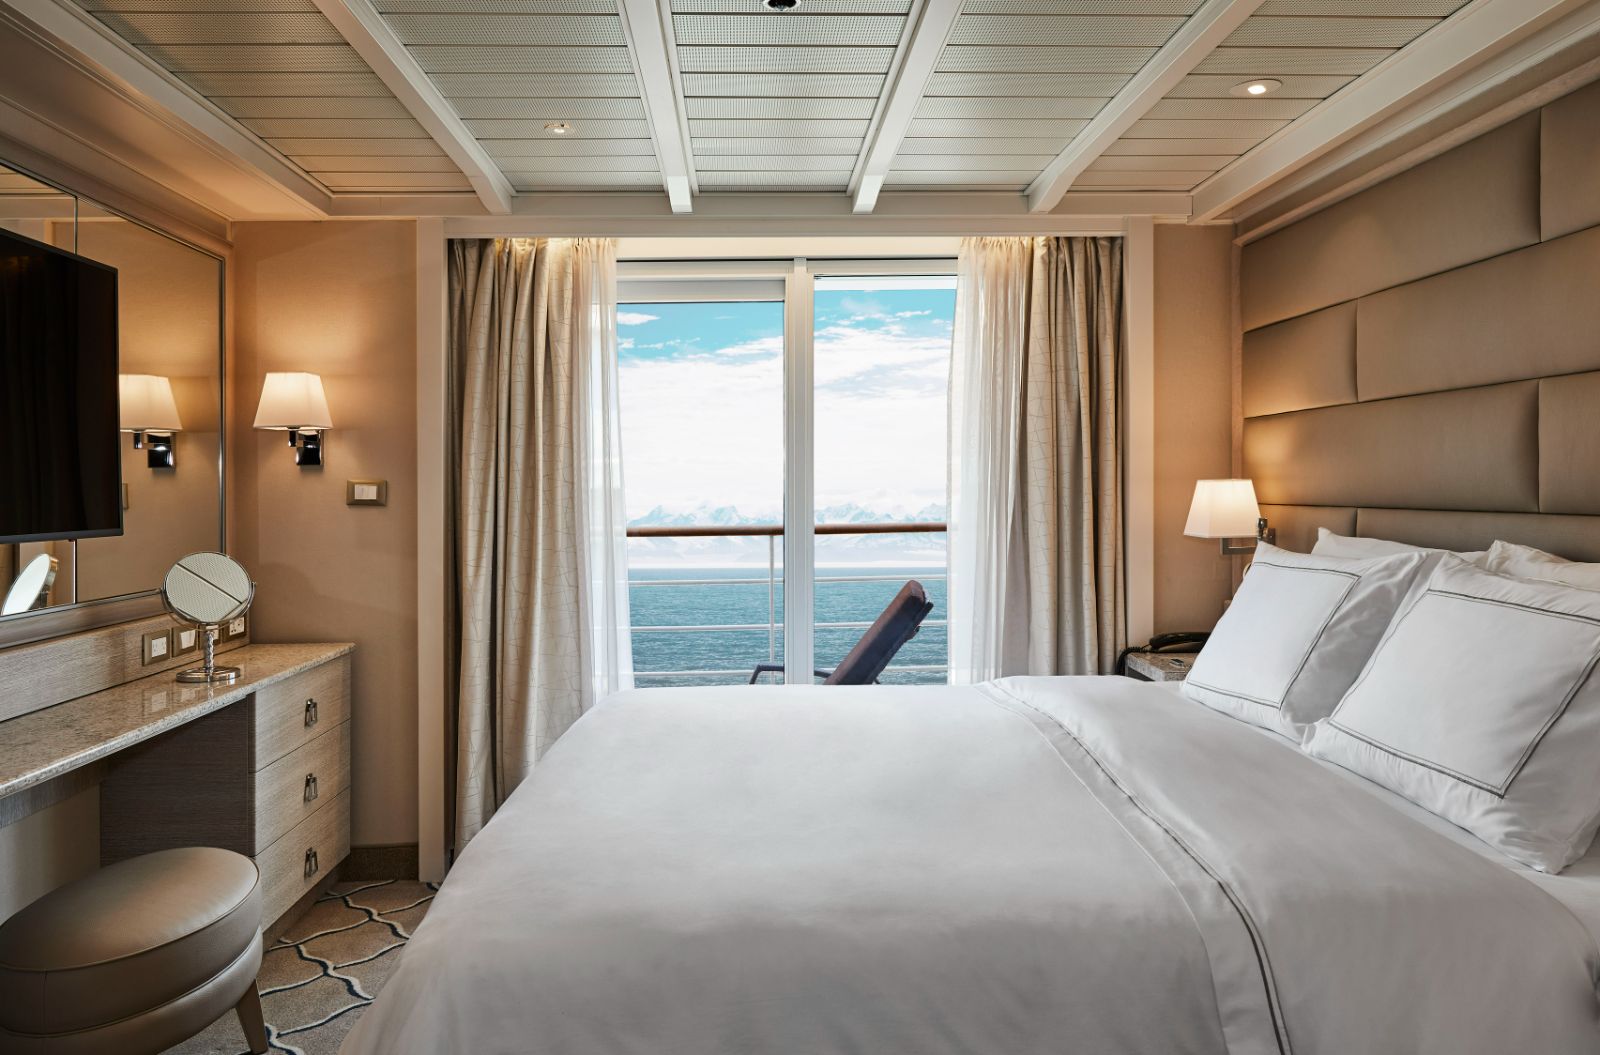 Guest suite cabin onboard Silversea's Silver Cloud cruise ship in the Arctic